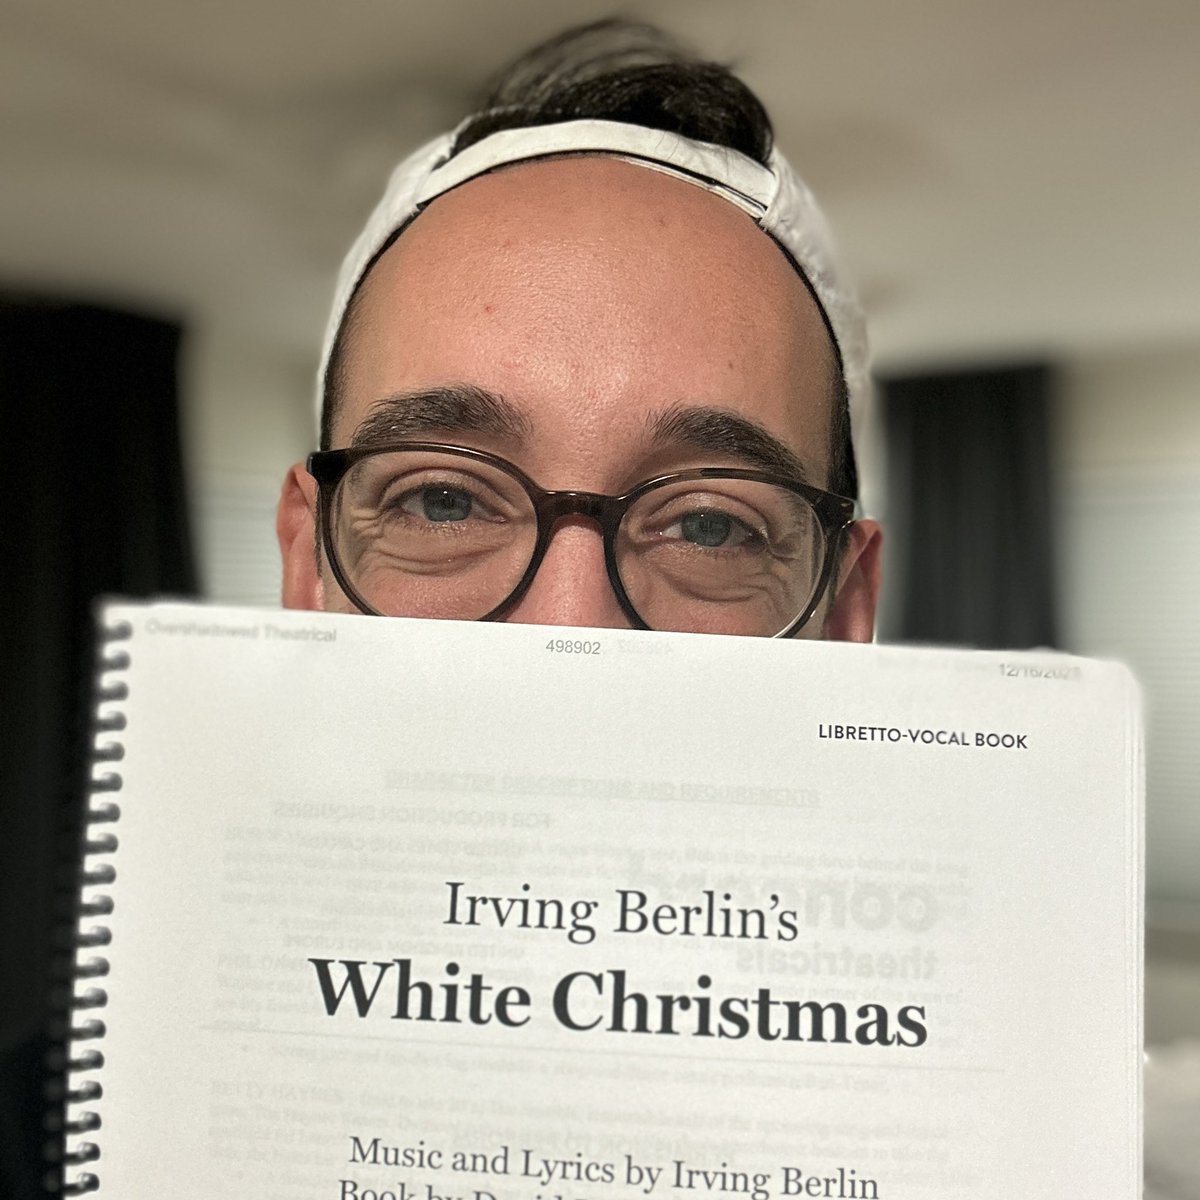 I can’t wait to be back on stage this holiday season playing Bob Wallace in White Christmas! If you want to see me sing and dance on stage, grab your tickets fast! The show is already about 70% sold out! Get tickets here: overshadowed.org